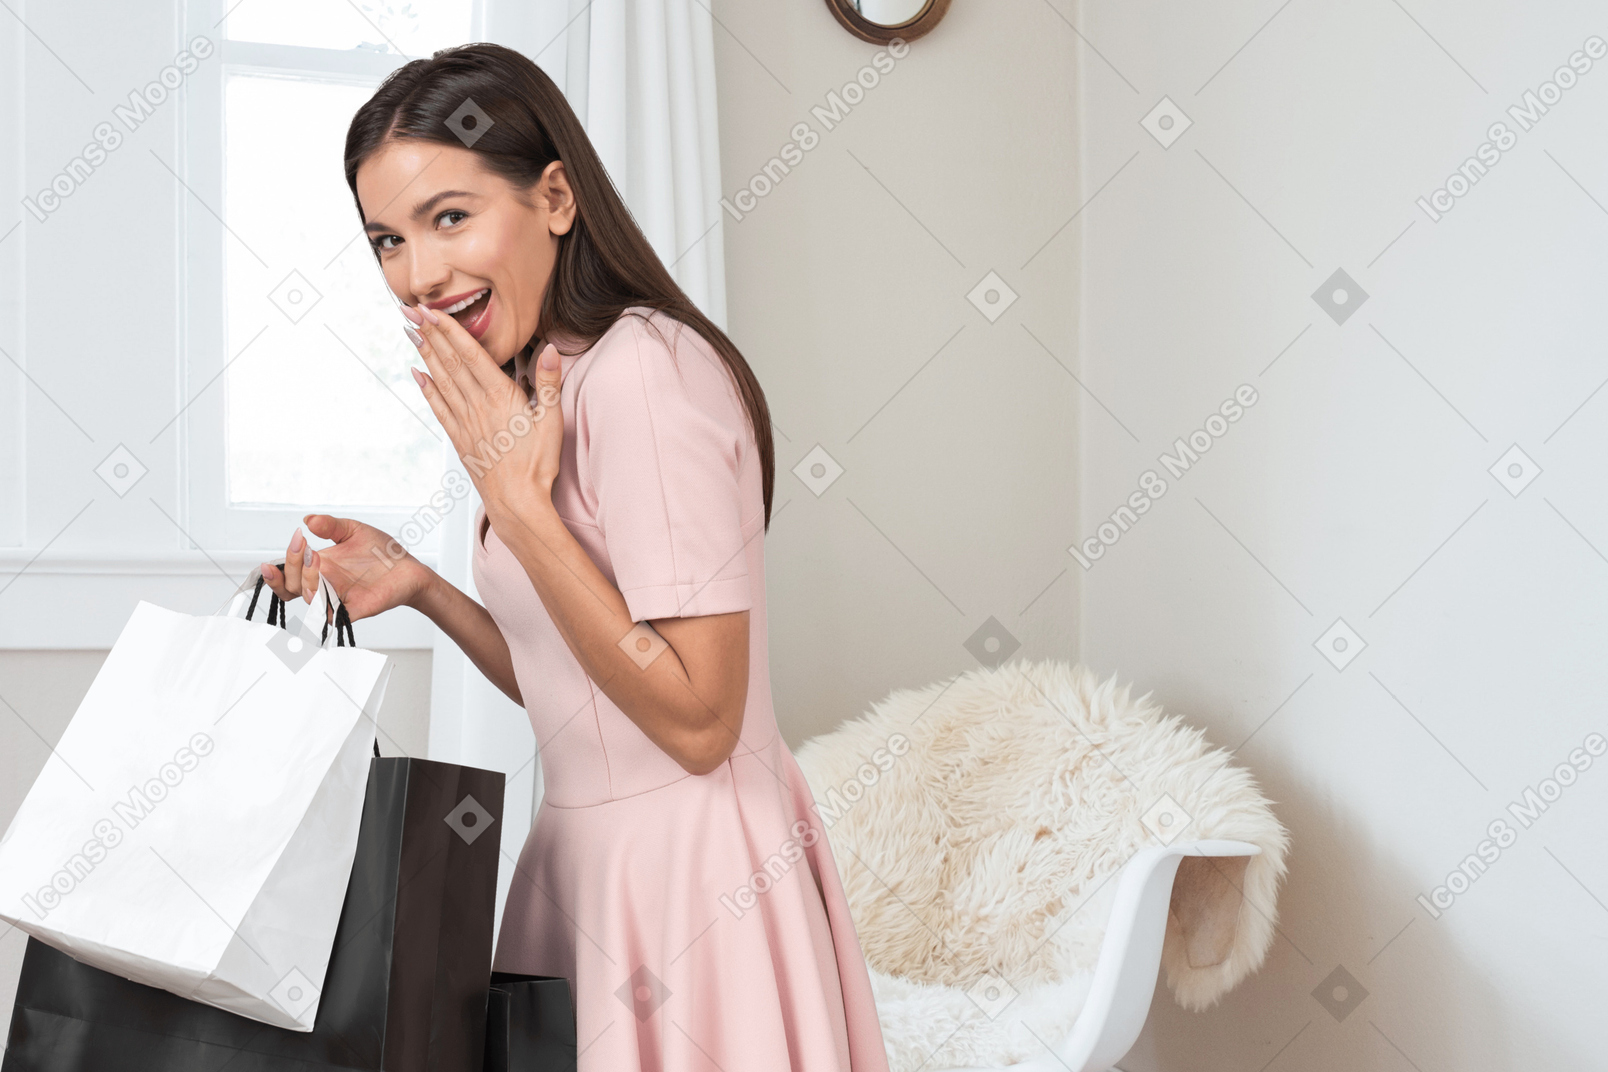 A woman in a pink dress holding shopping bags